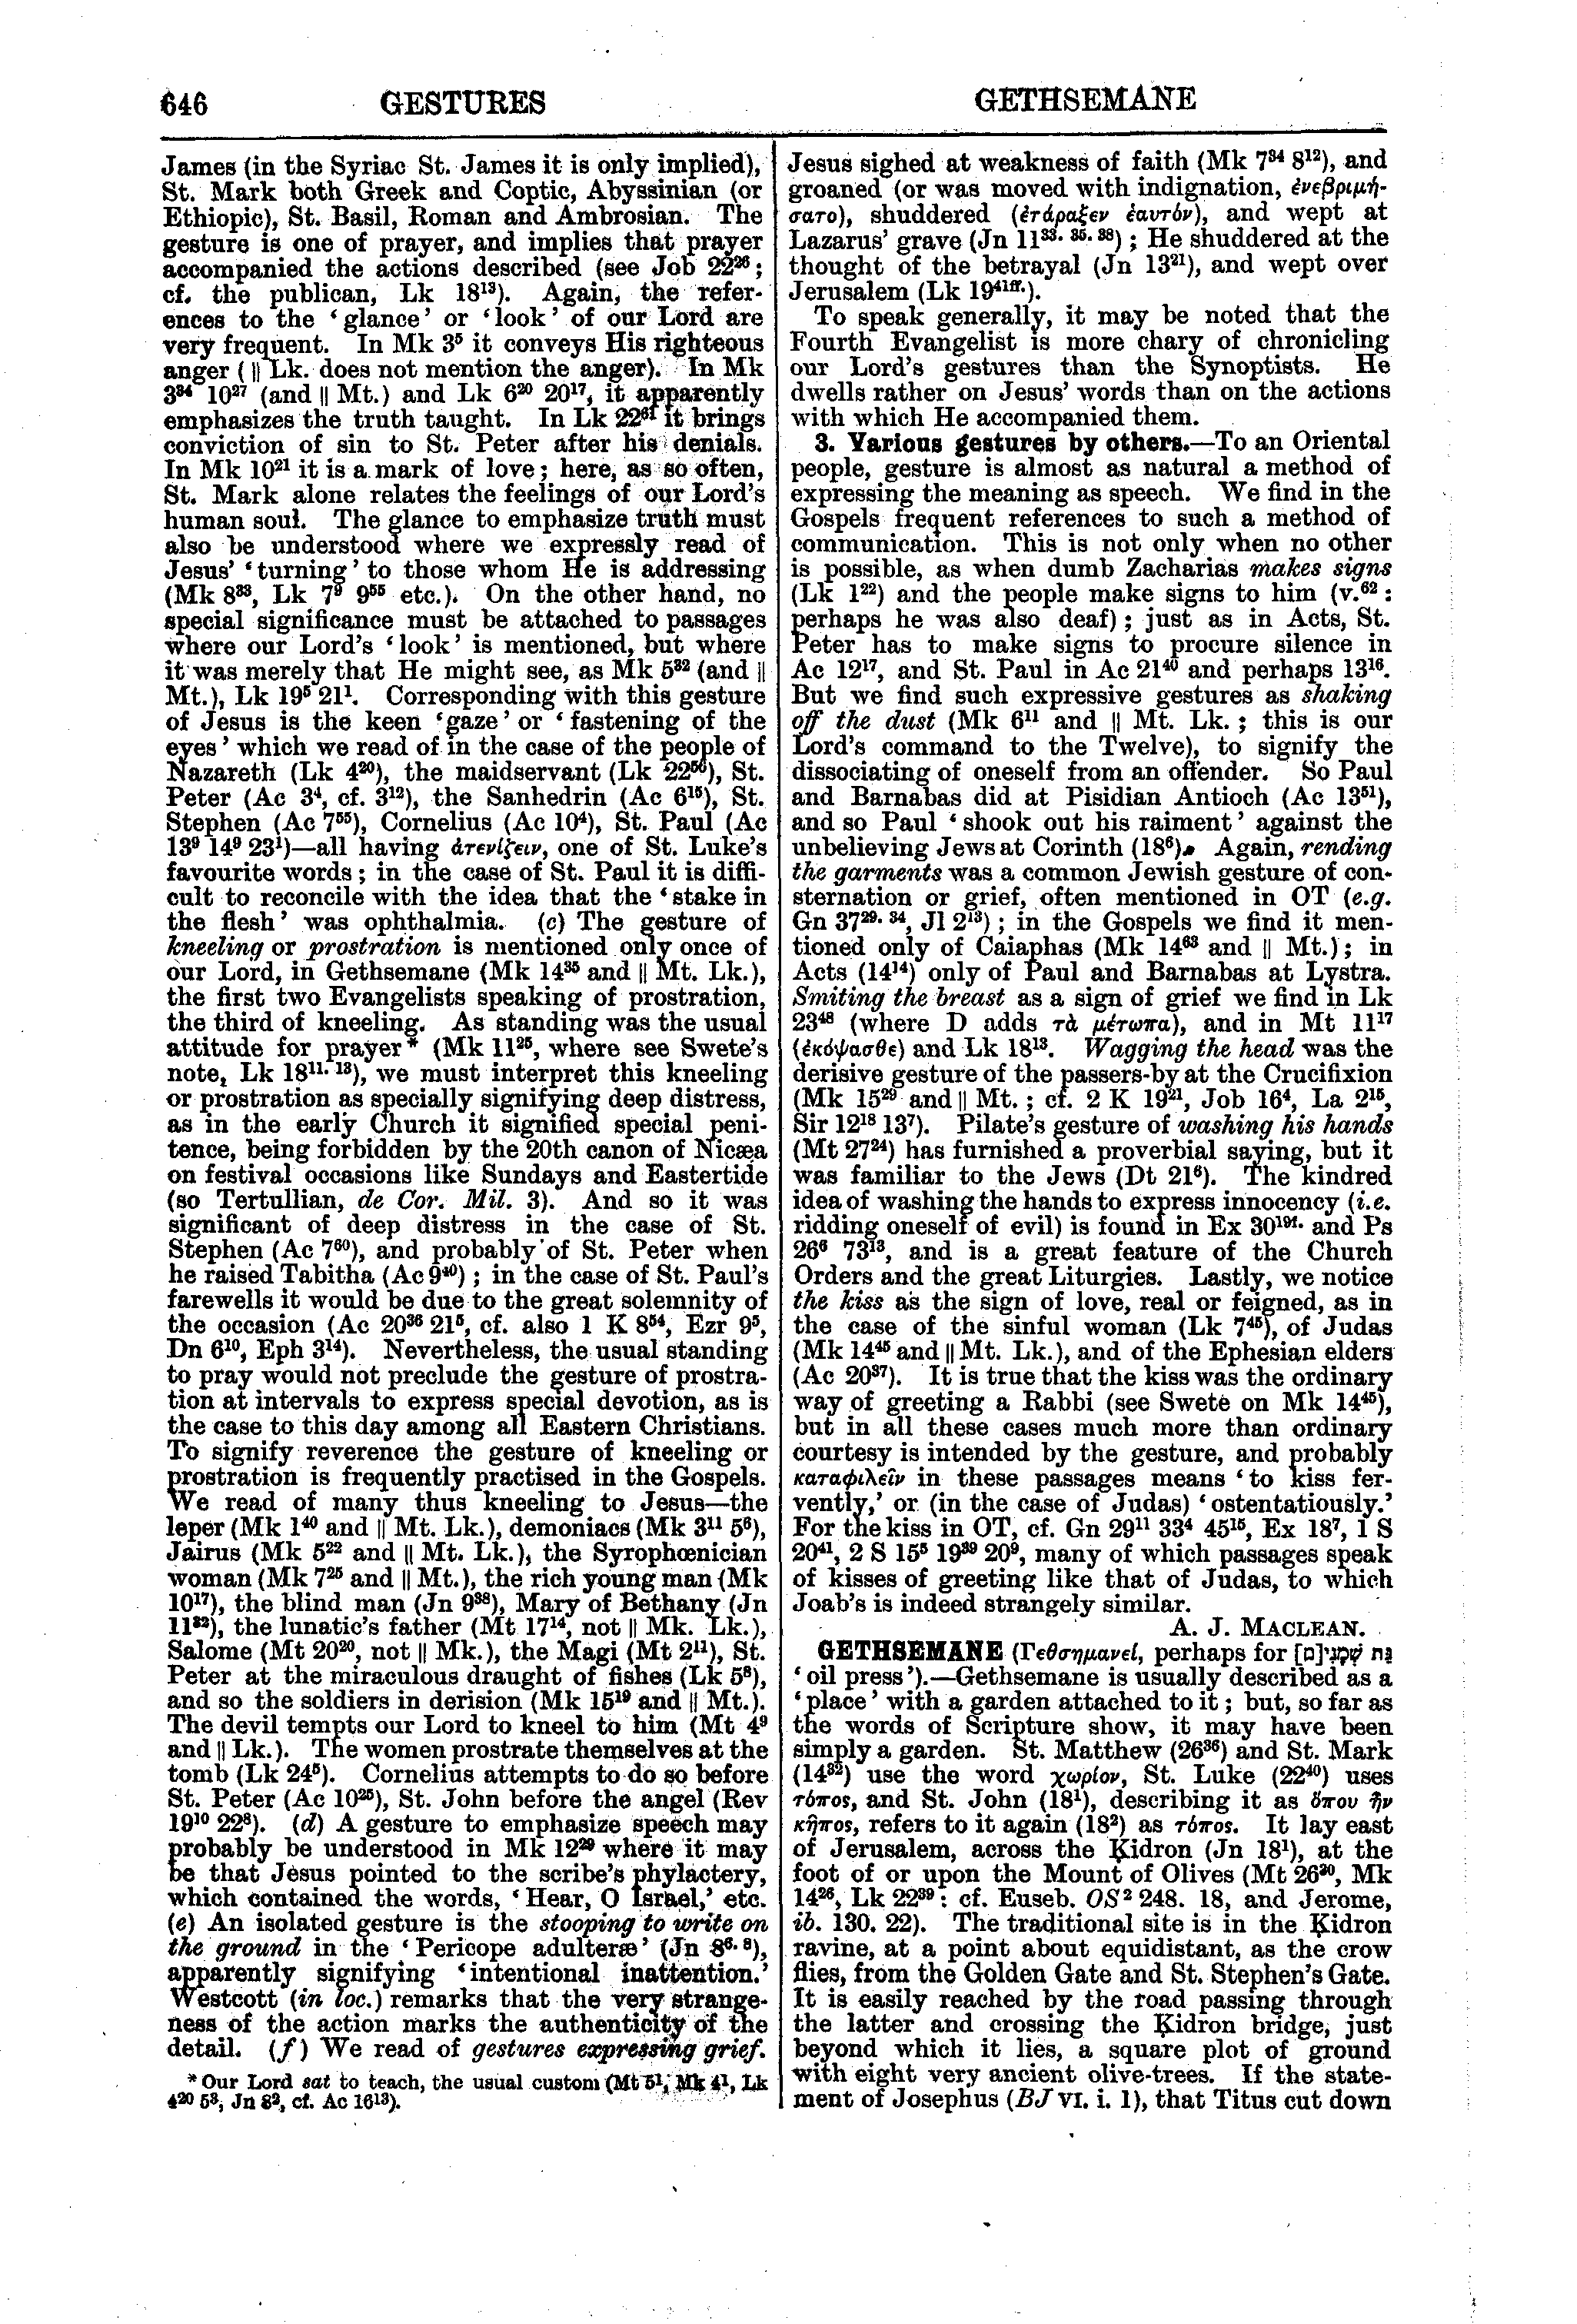 Image of page 646